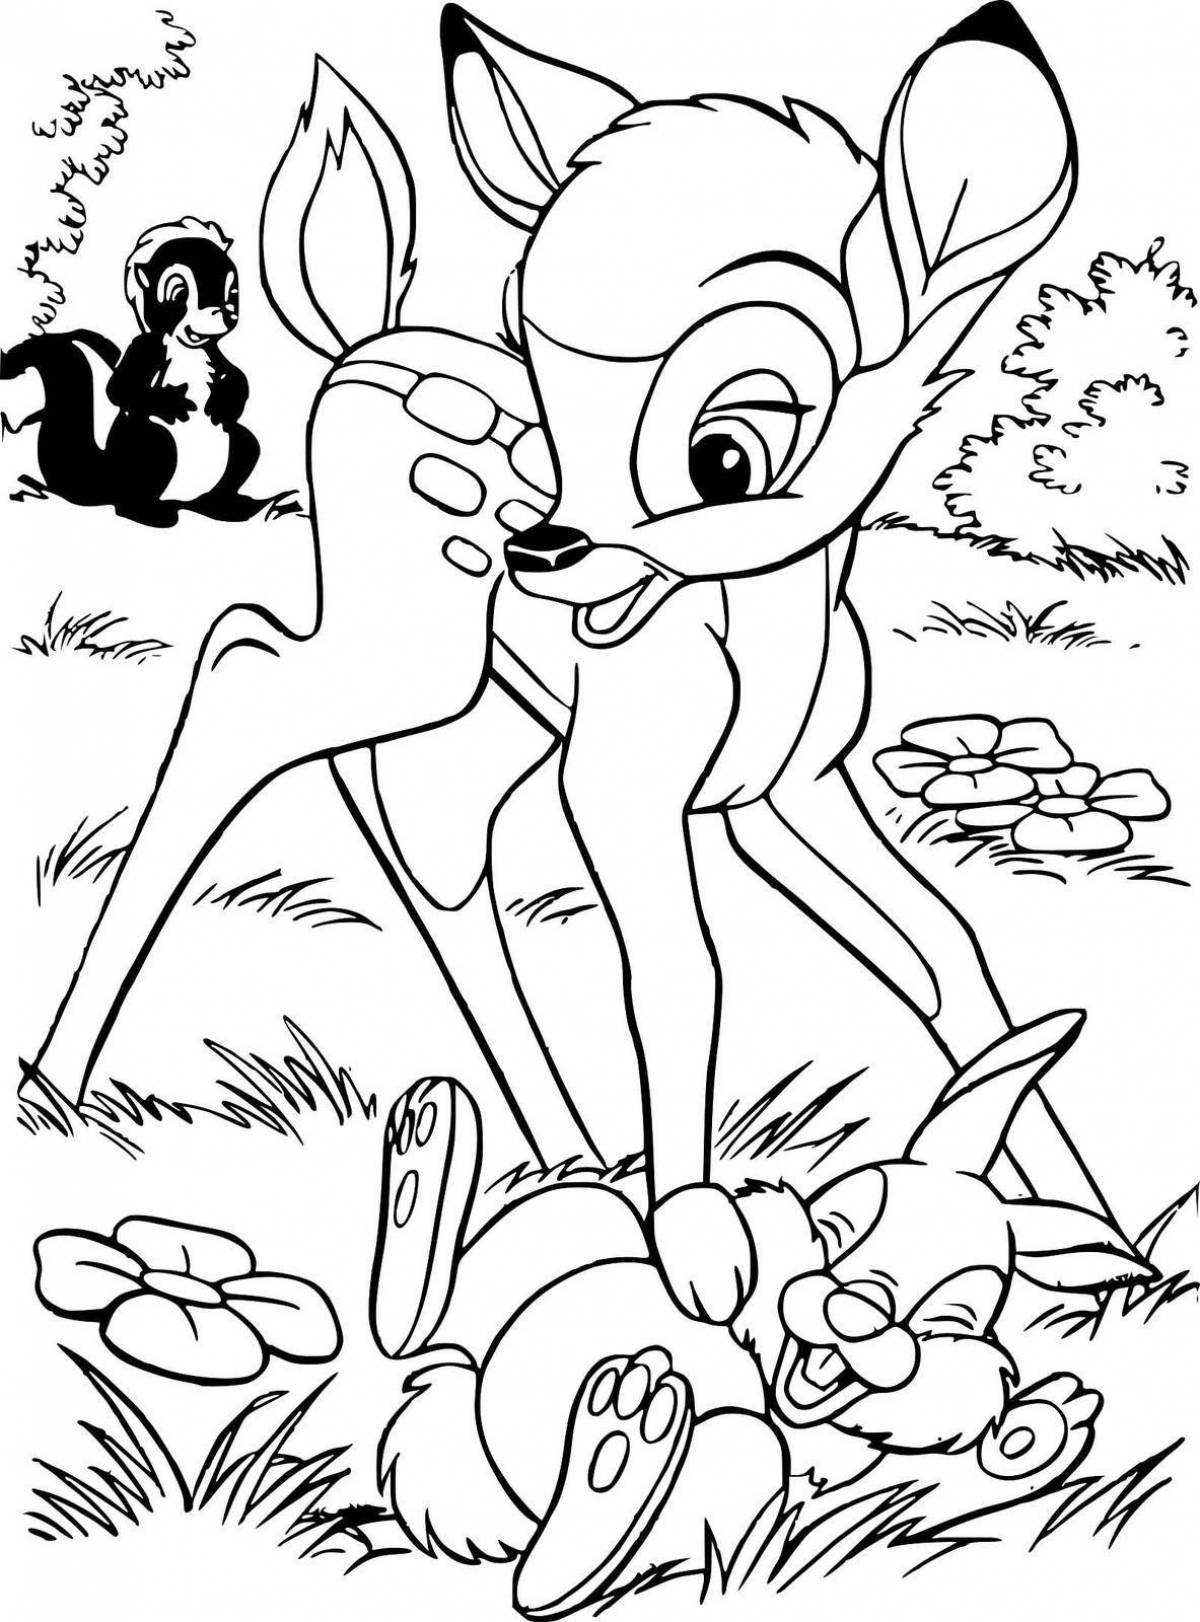 Fun Disney coloring book for 6-7 year olds